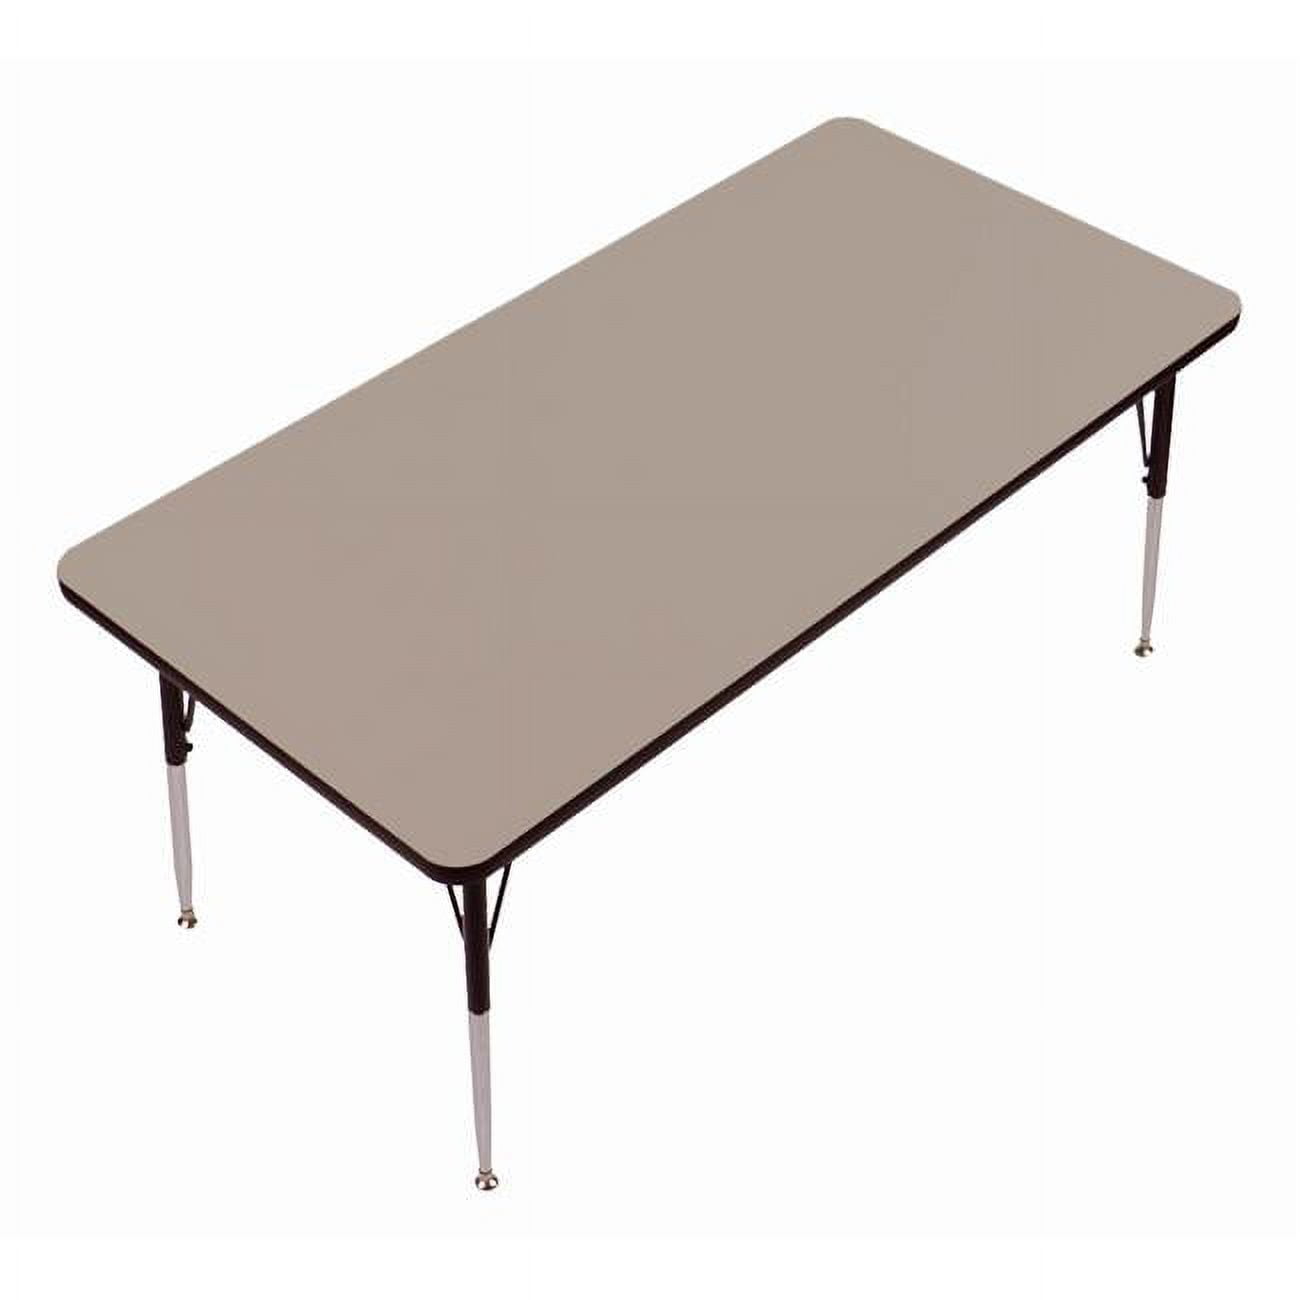 A2448-trps-54 1.25 In. High Pressure Top Trapezoid Activity Tables, Savannah Sand - 24 X 48 In.